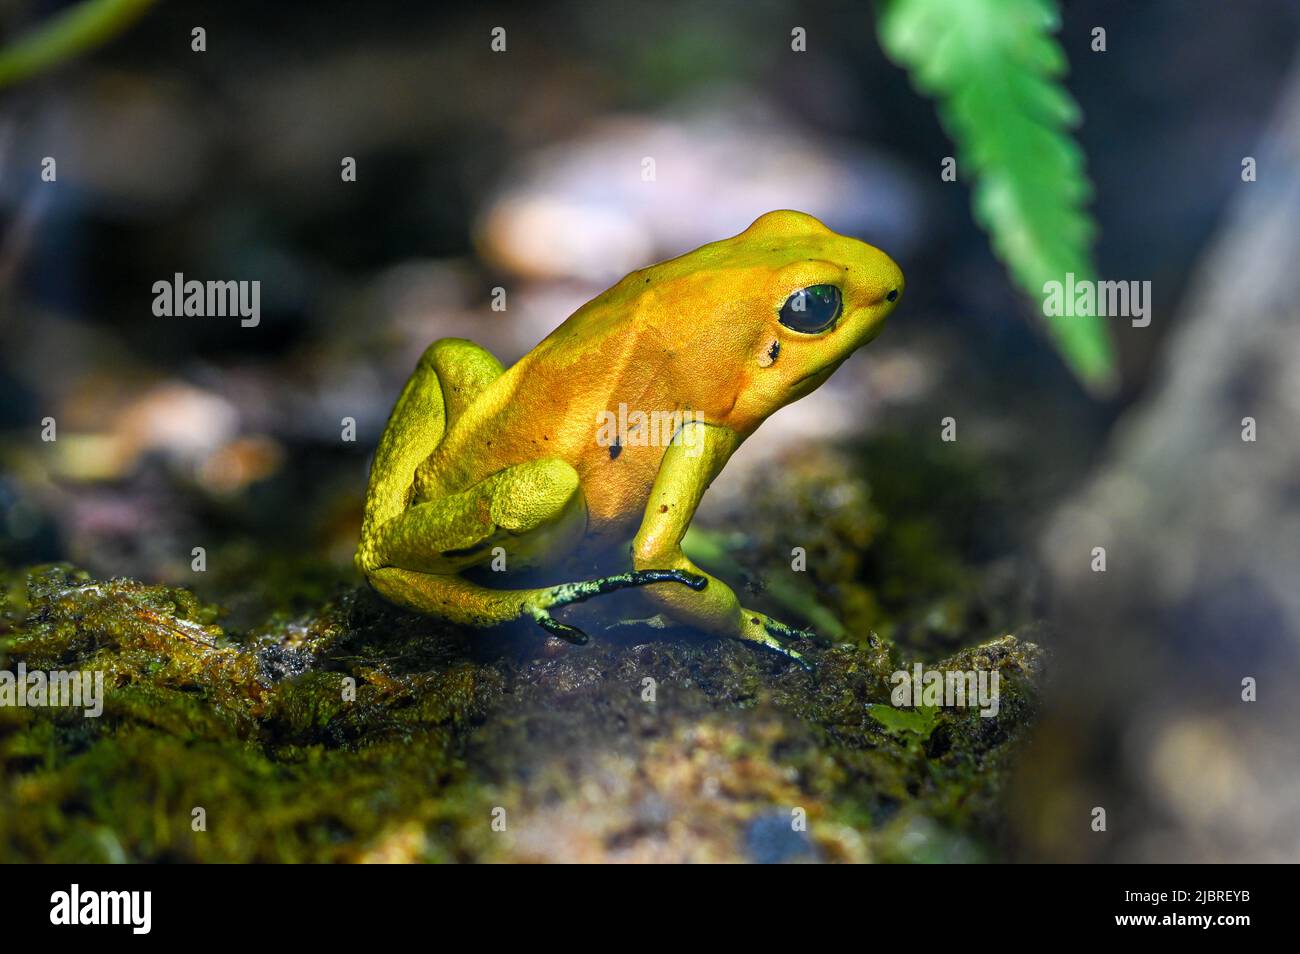 Golden poison dart frog (Phyllobates terribilis). Tropical frog living in South America. Stock Photo